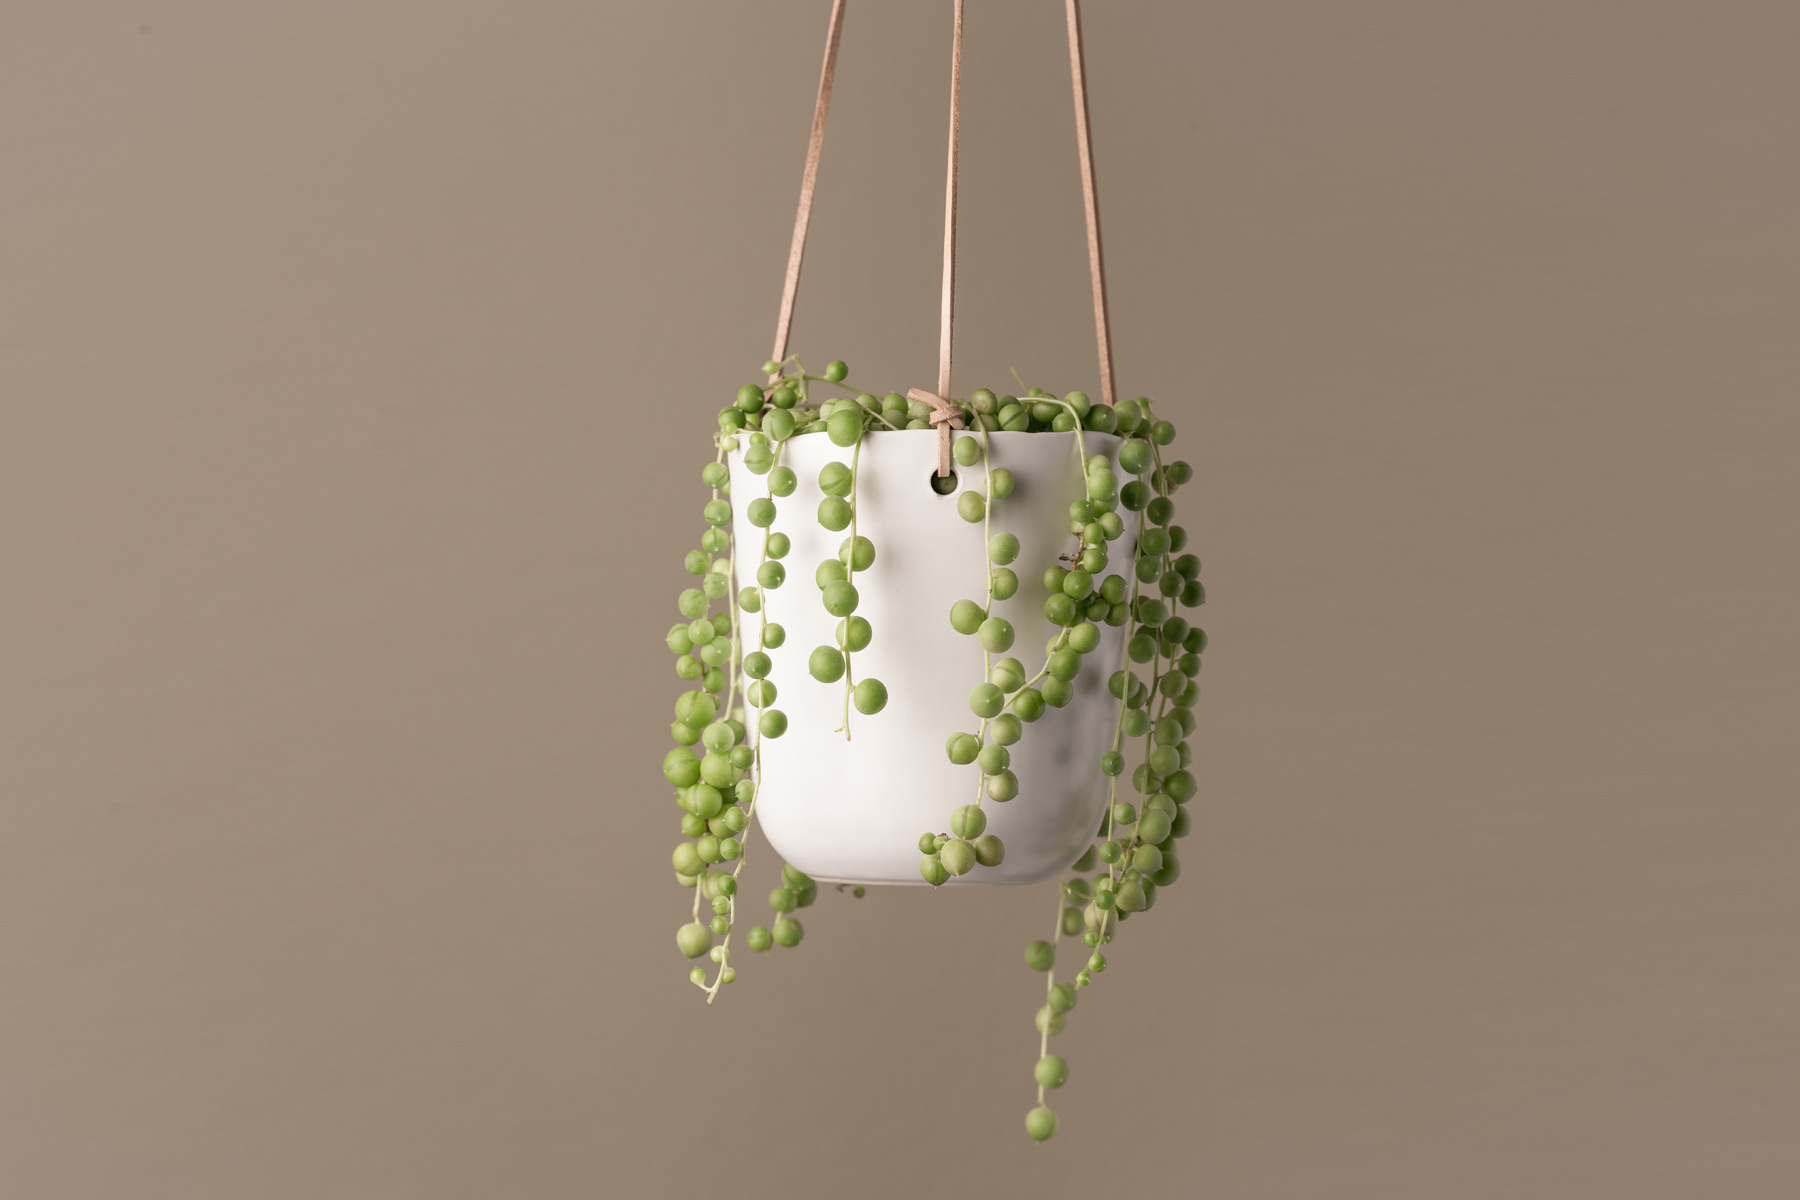 Artificial Plant STRING OF PEARLS in Ceramic Pot W/ Wood Stand